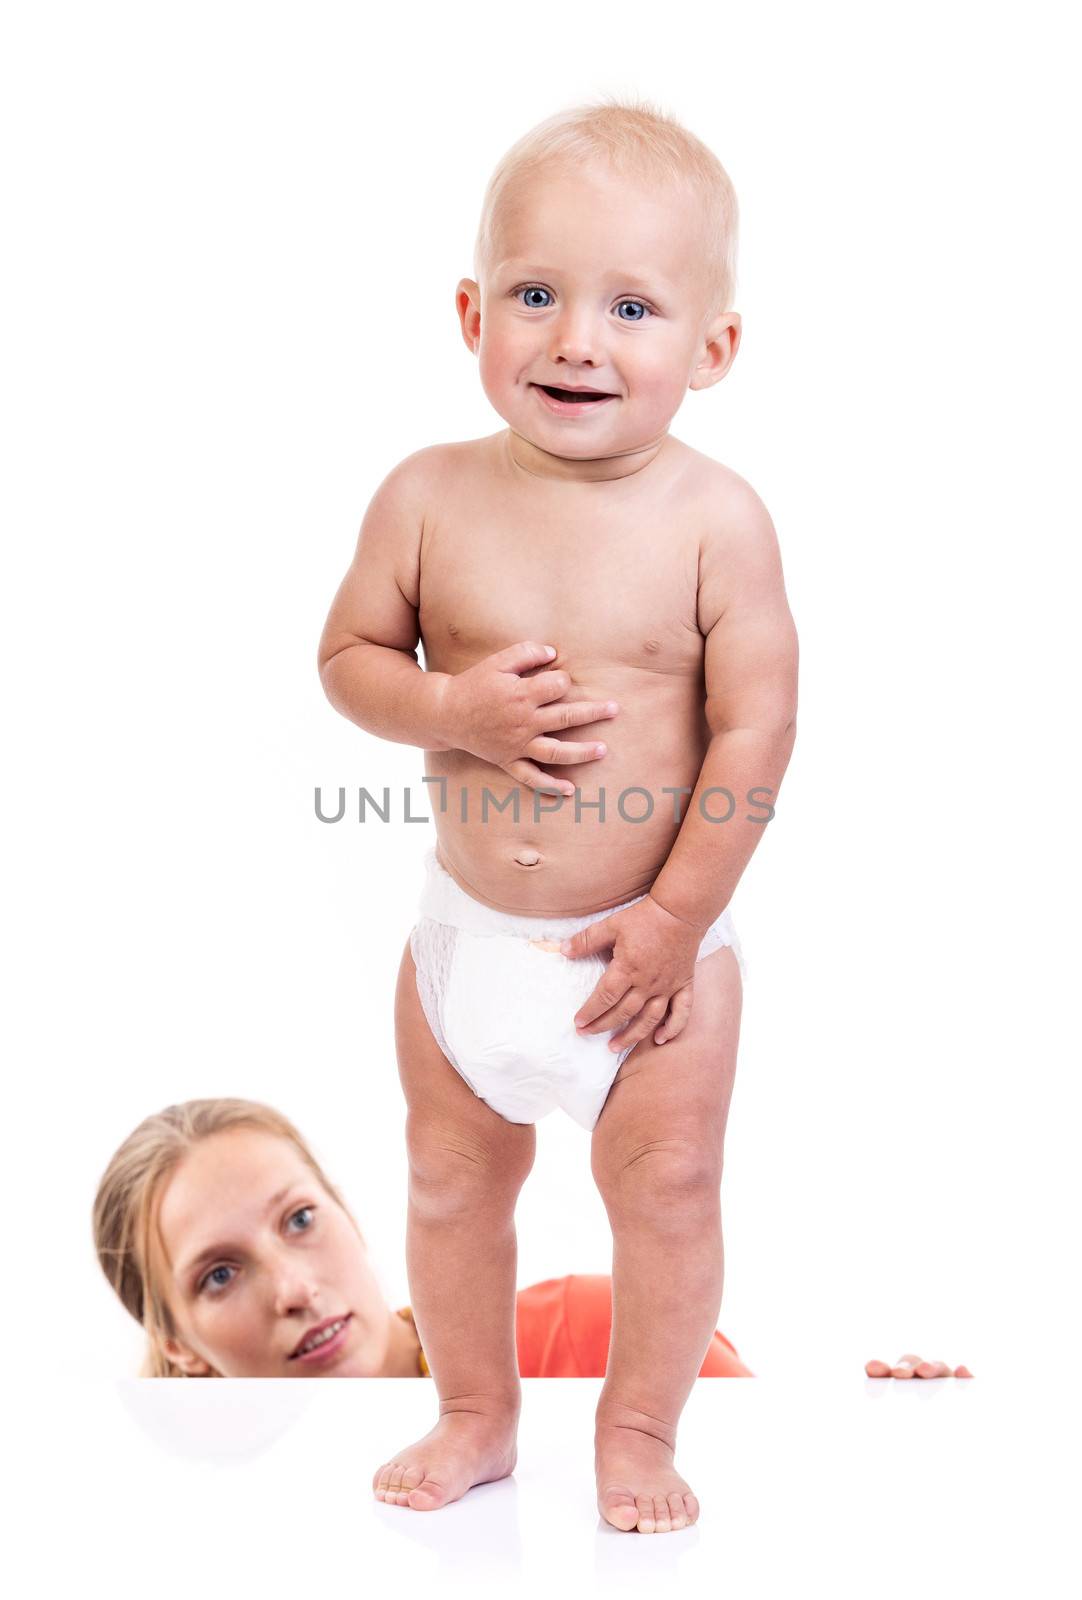 Mother watching her baby boy making first steps over white background